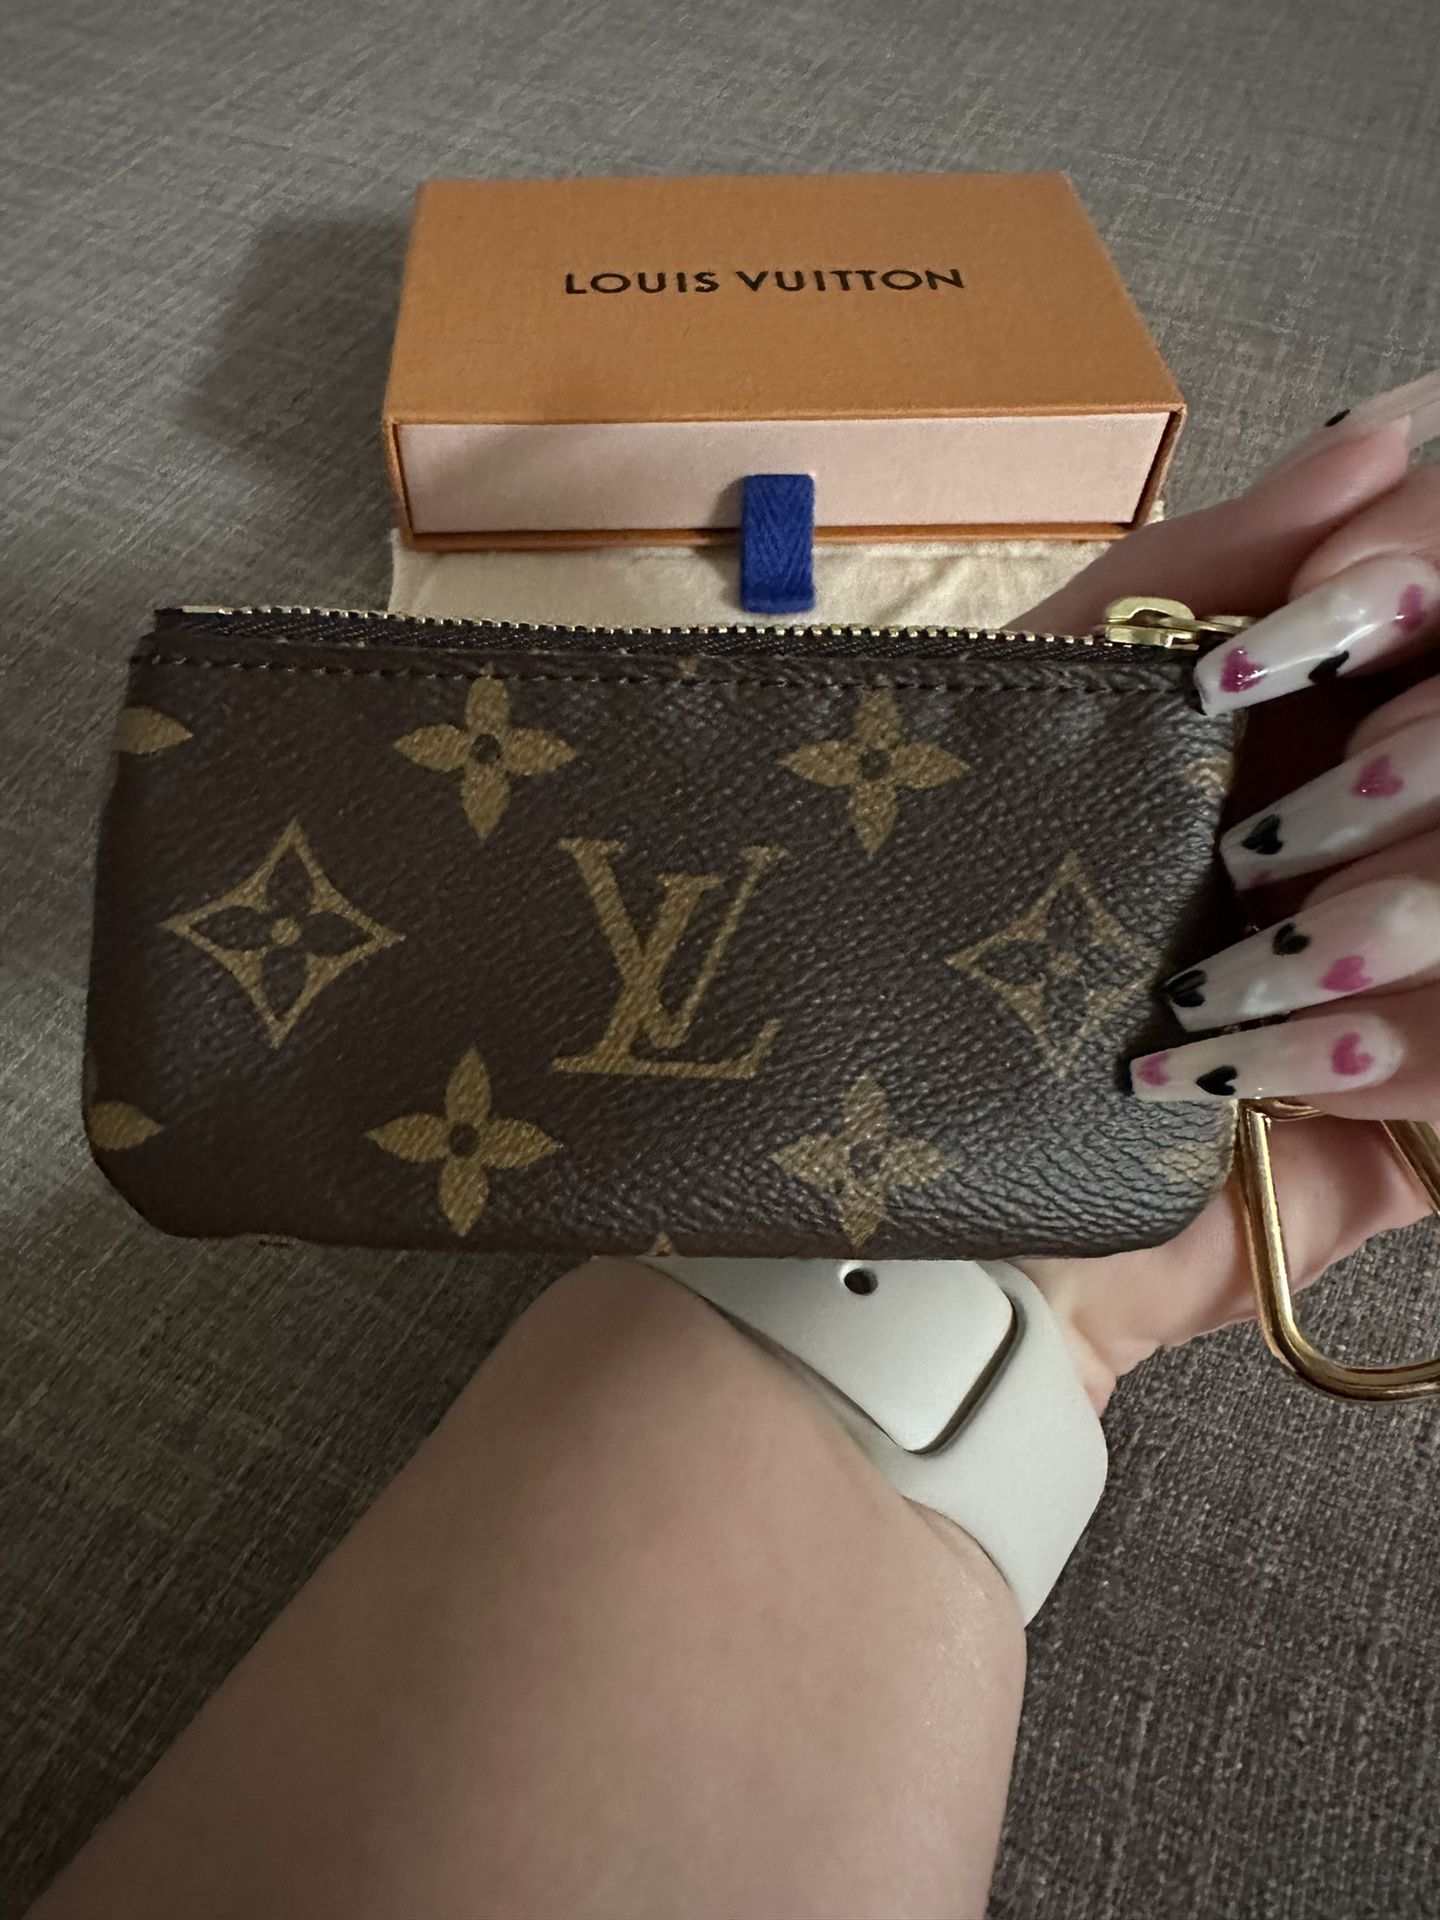 Louis Vuitton M62650 Key Pouch Authentic Like New for Sale in Tustin, CA -  OfferUp